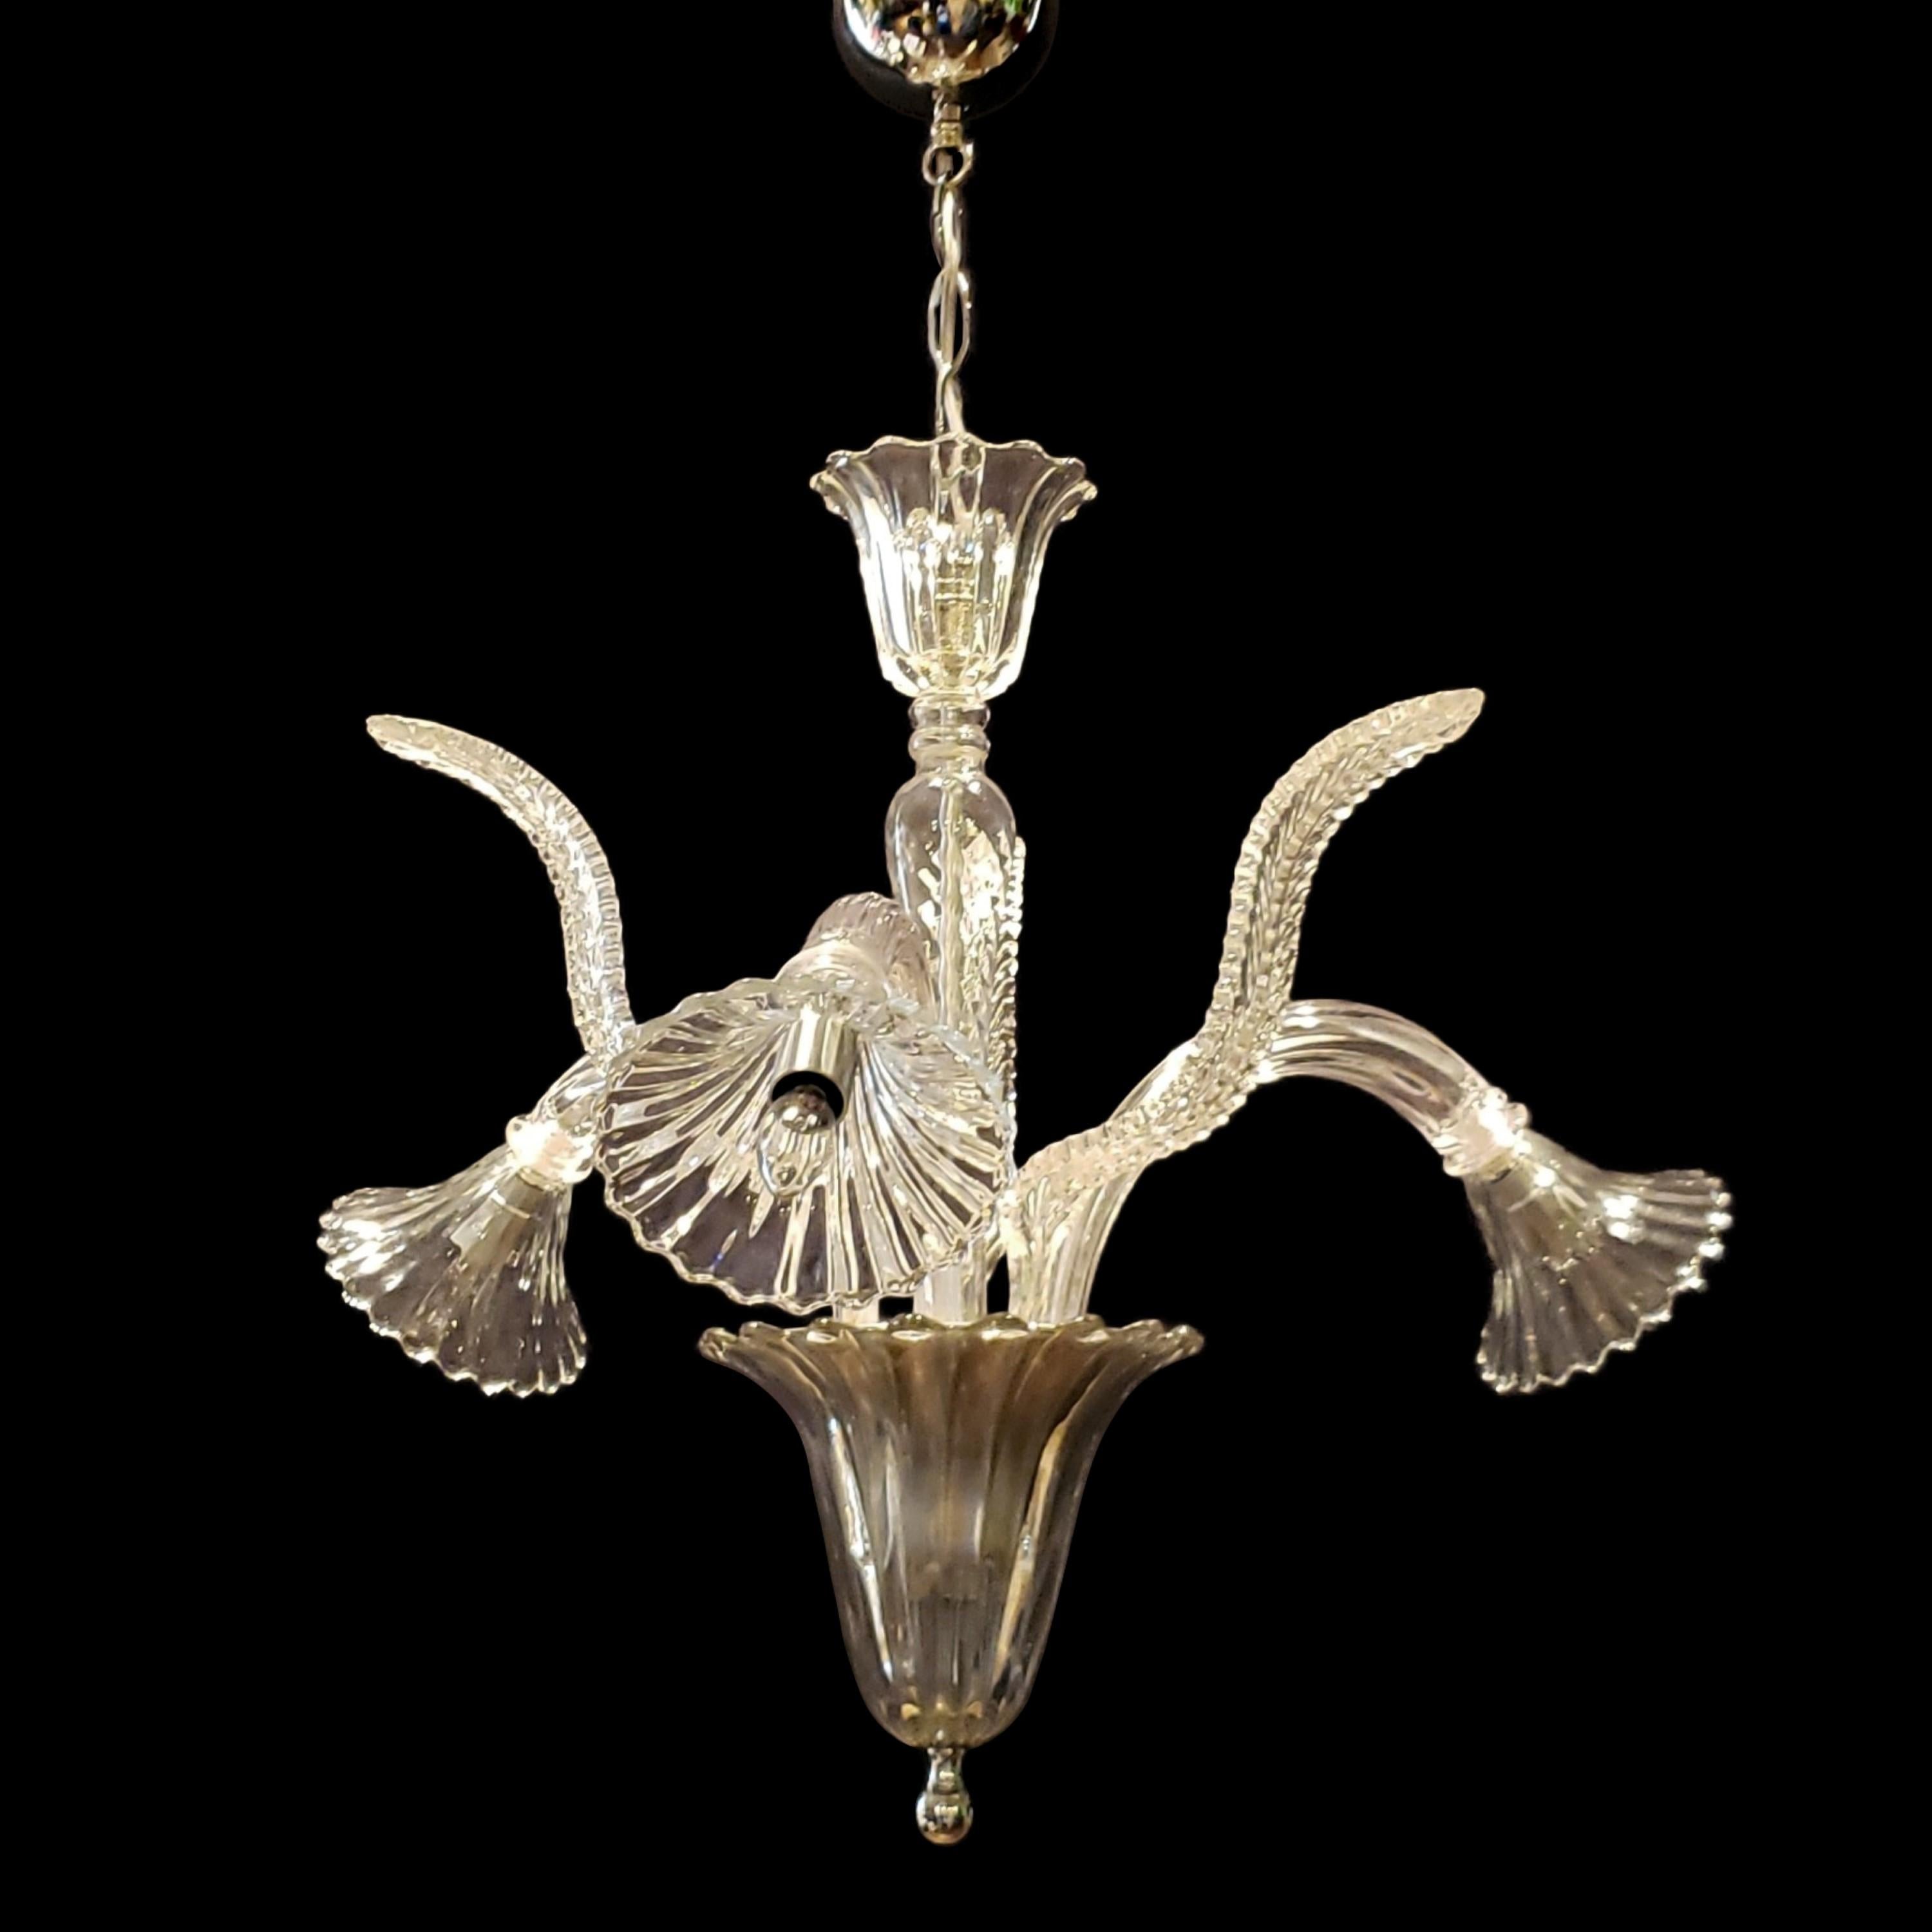 Late 20th Century Murano clear crystal chandelier with three J shaped arms and narrow up leaves. This comes rewired and ready to install. Ships disassembled. Cleaned and restored. Please note, this item is located in our Scranton, PA location.